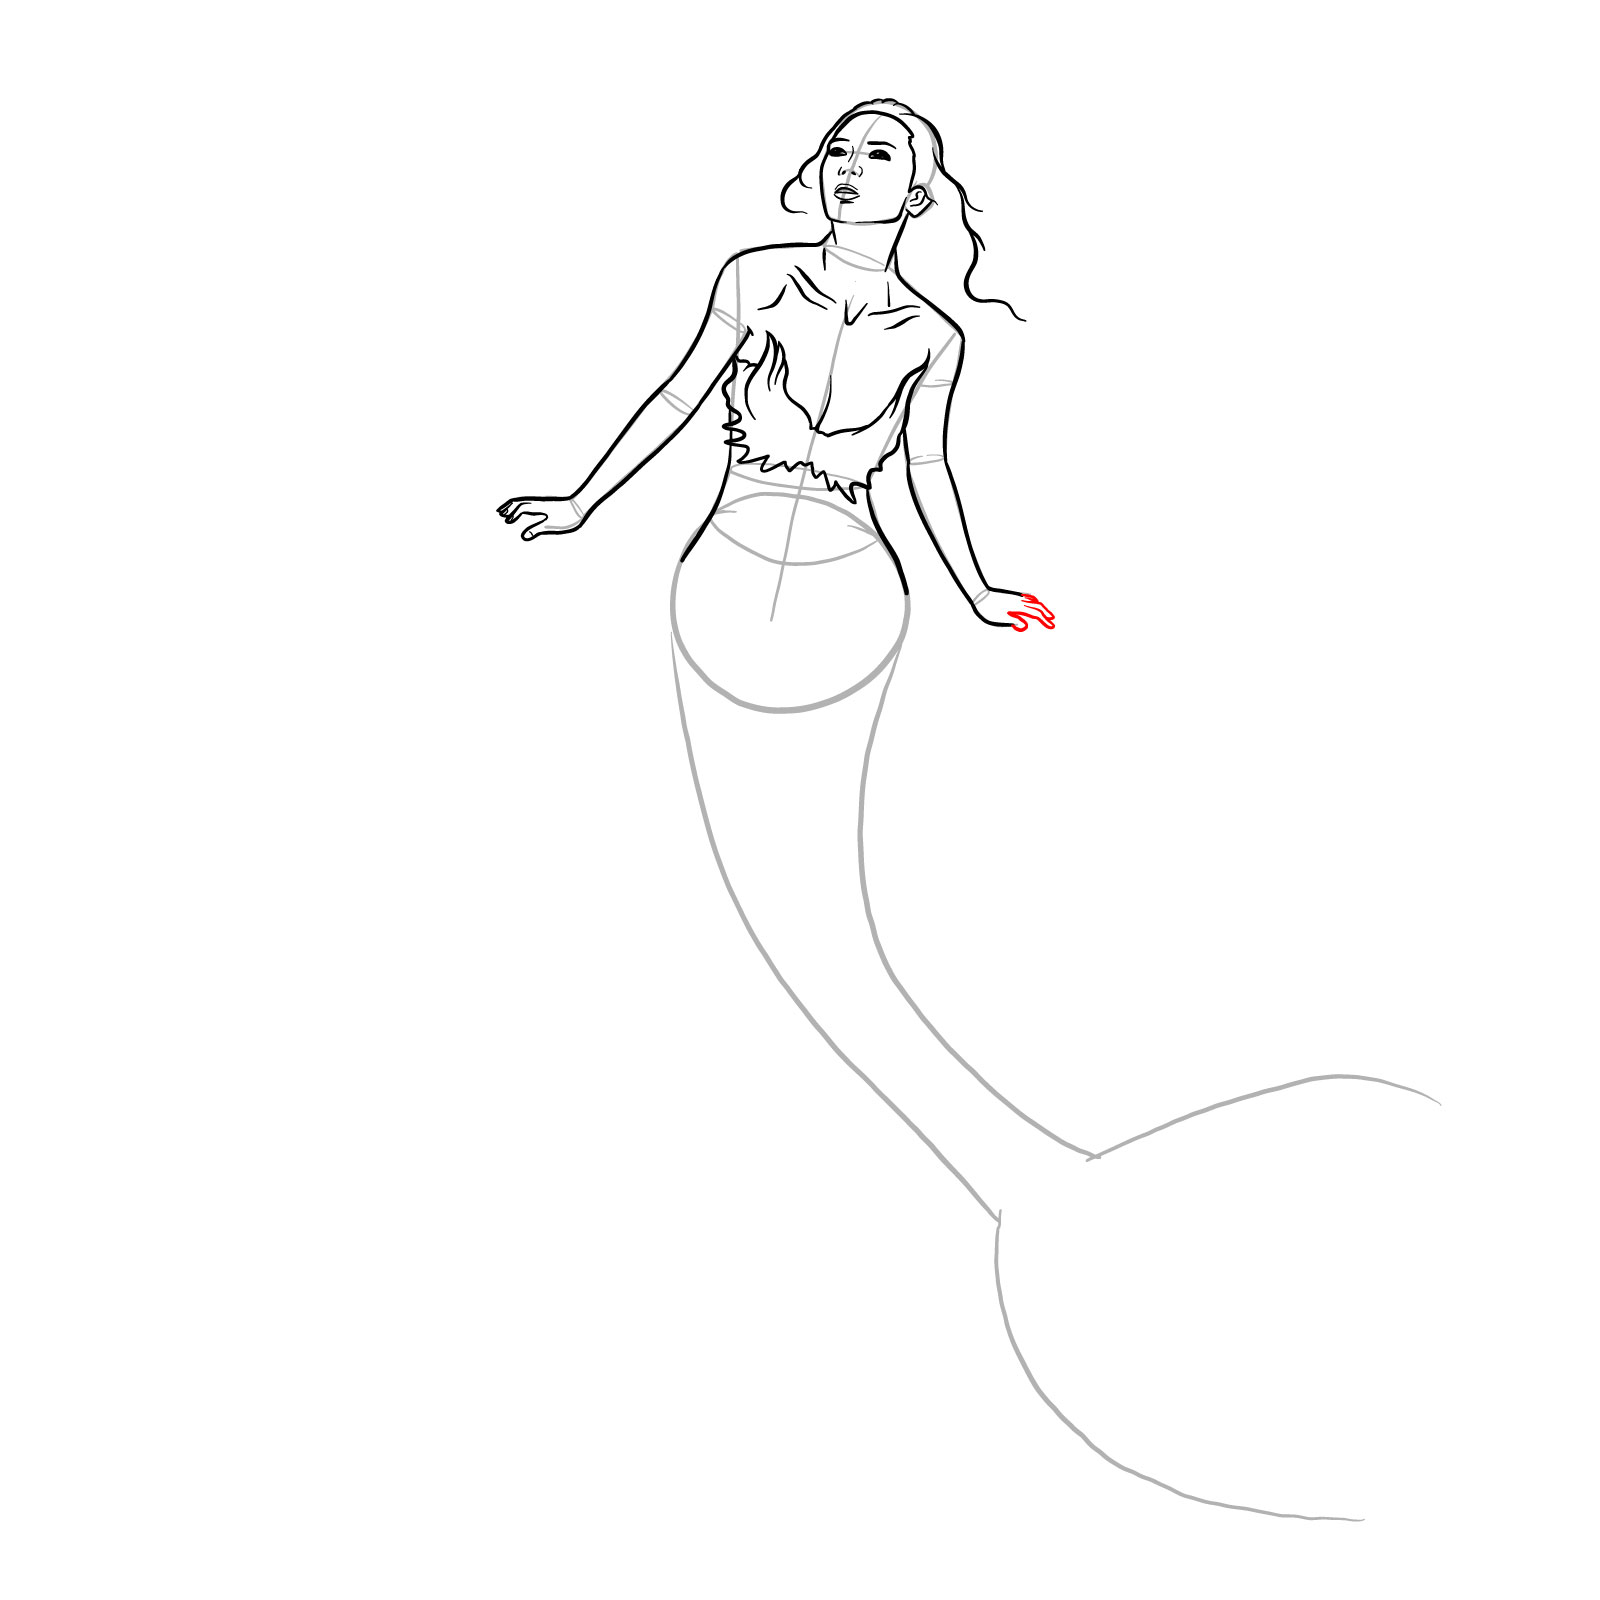 How to draw a Mermaid - step 18